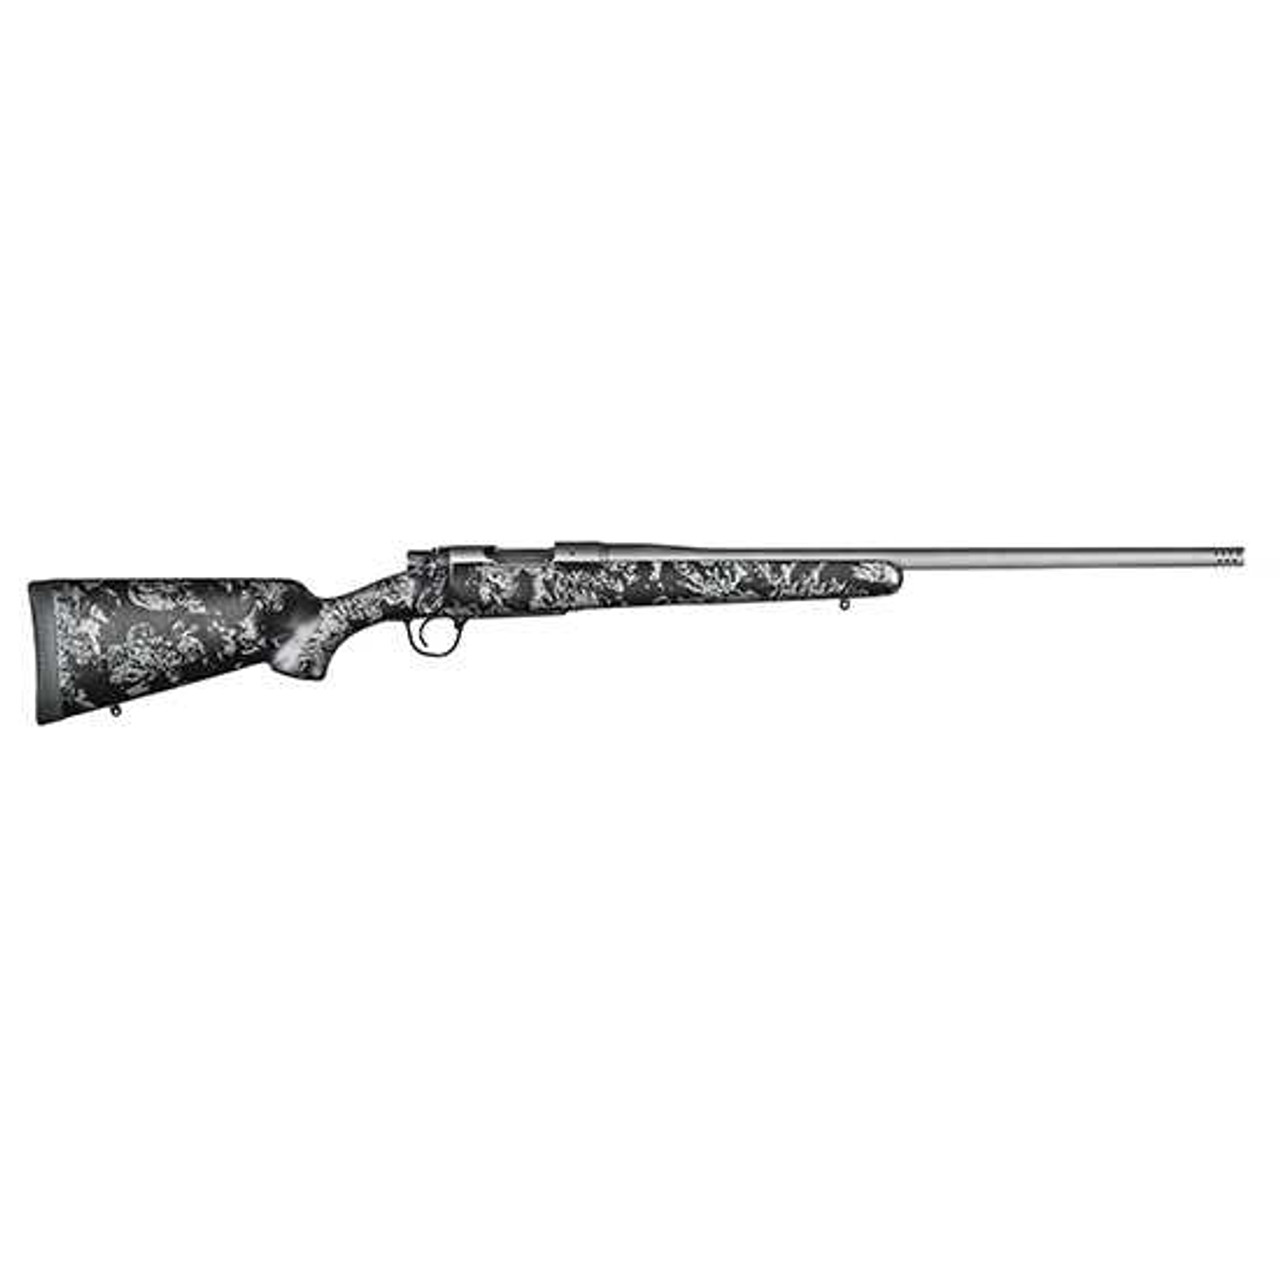 CHRIS MESA FFT 308WIN 20 BLK/GRY